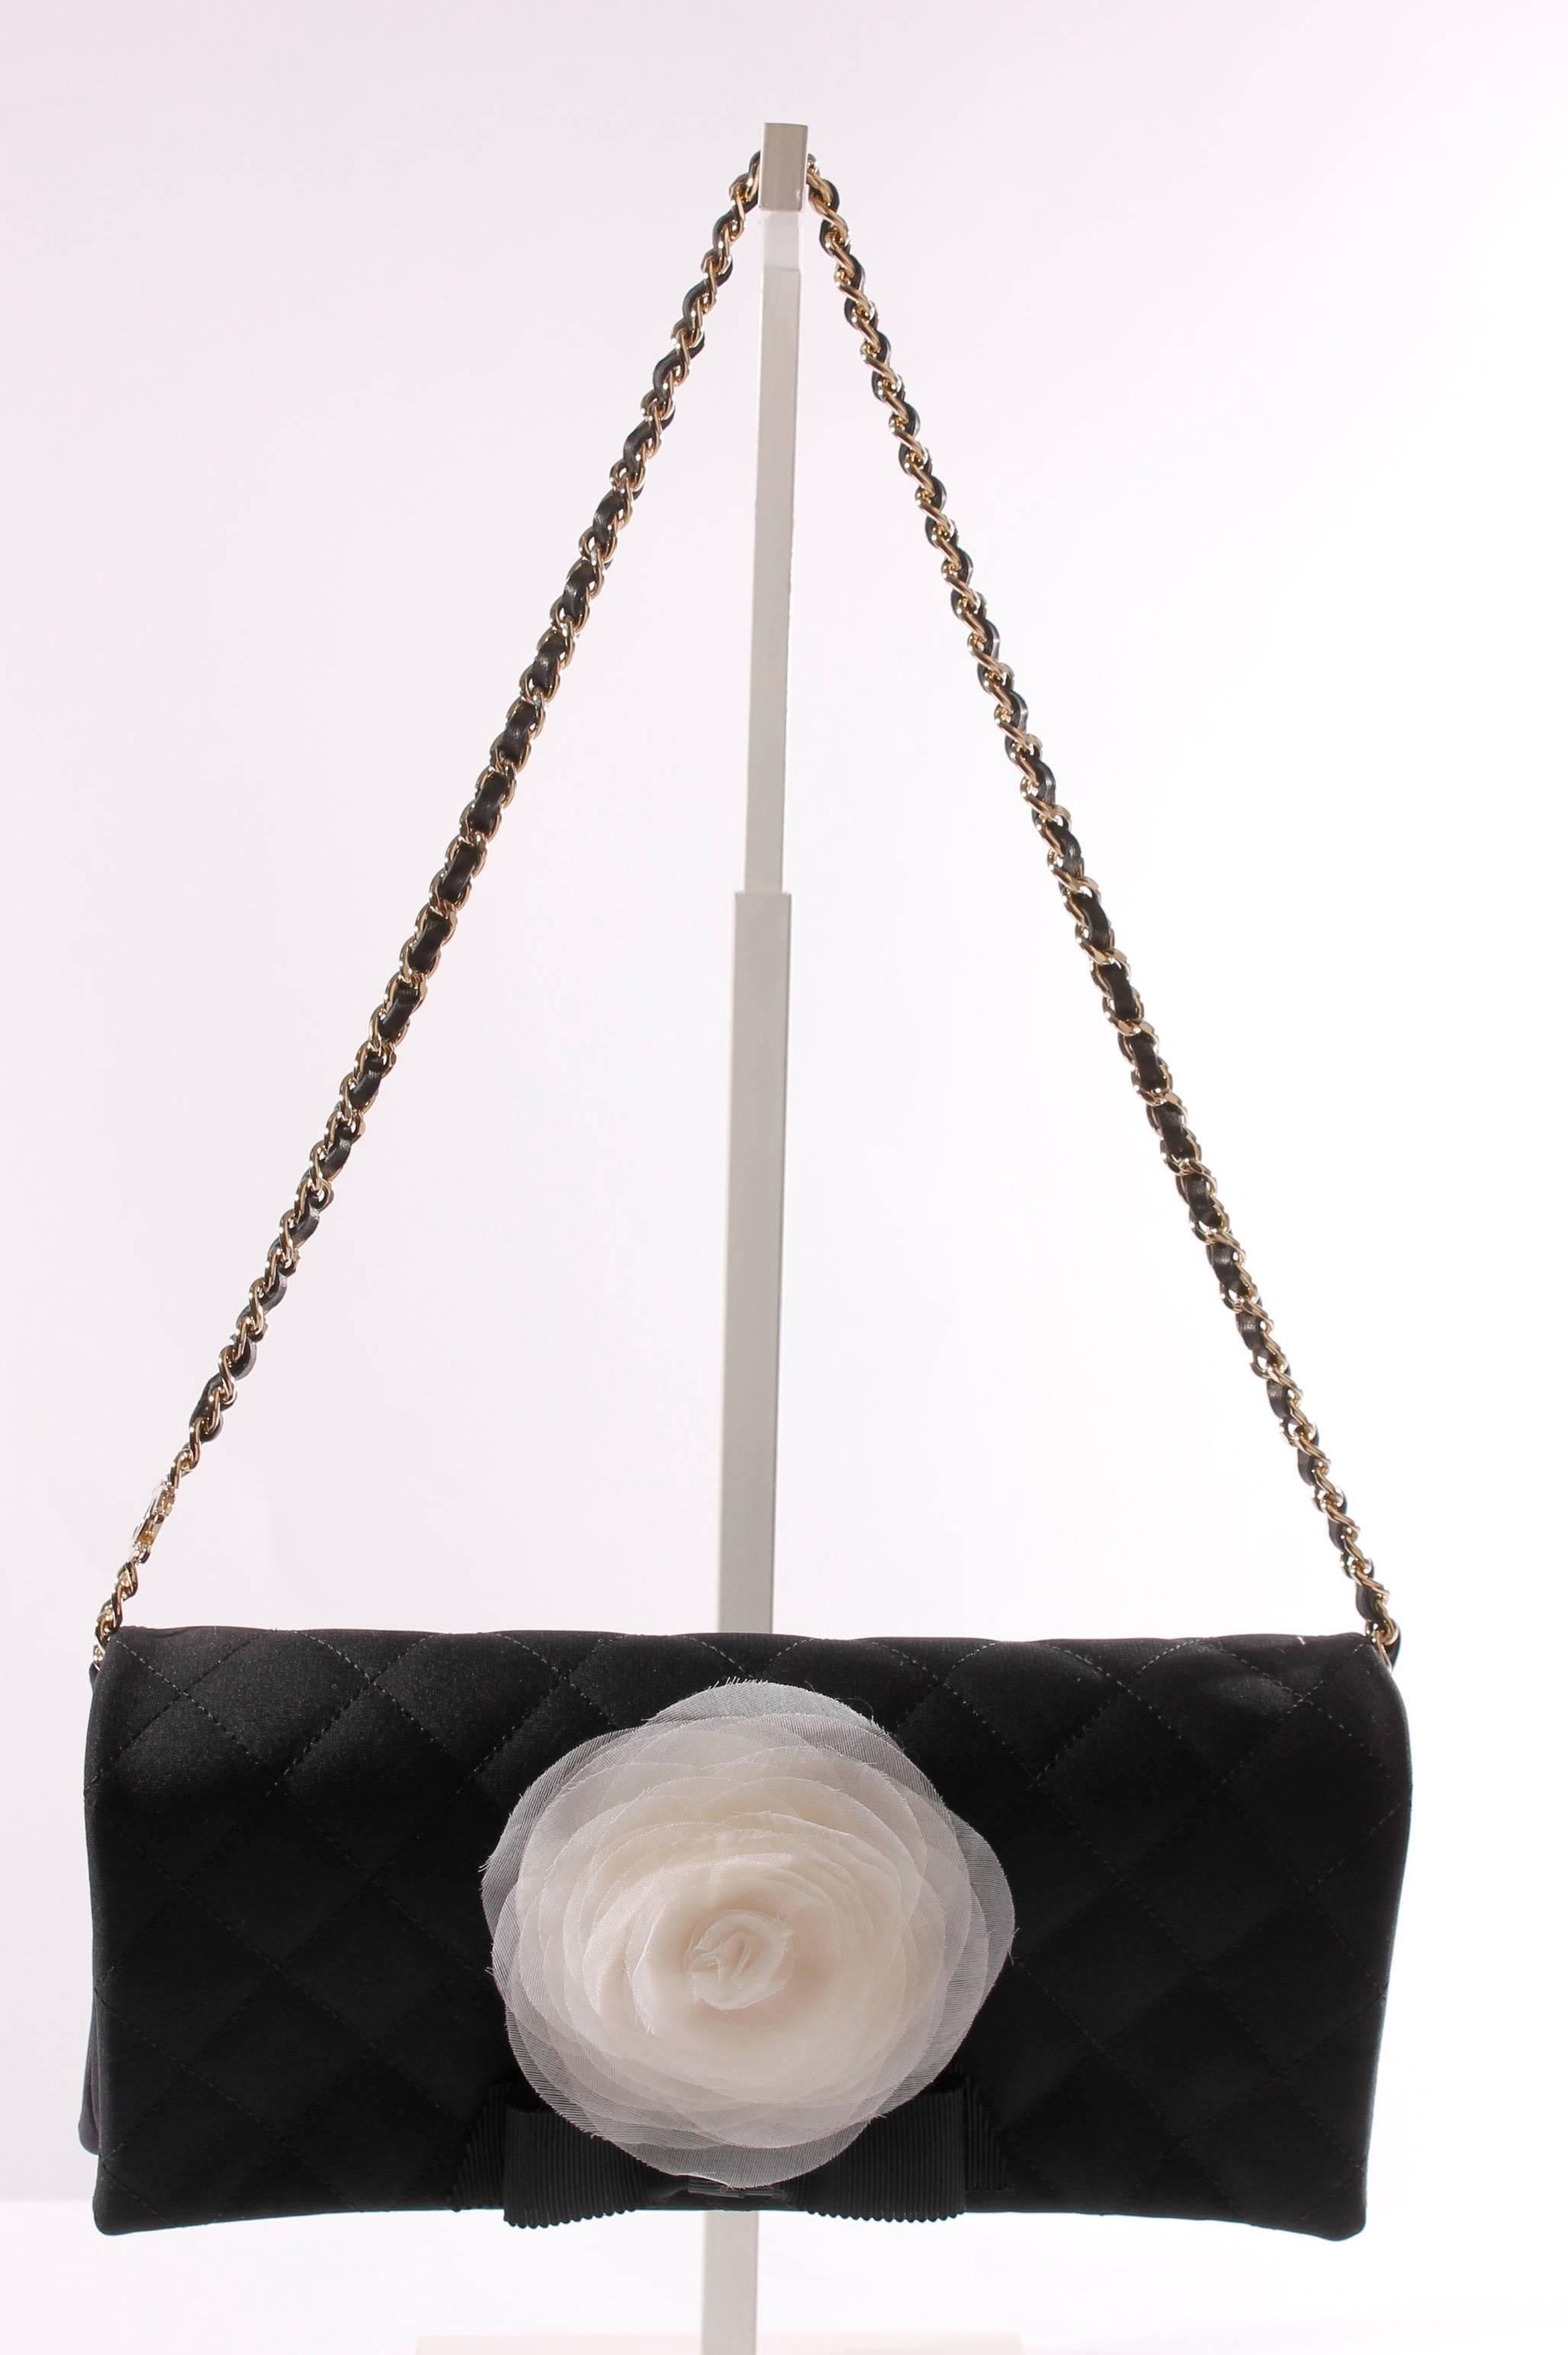 
Ooooh la la! This is true beauty! A wonderful and exquisite evening clutch by Chanel in matte black satin with a white chiffon camellia flower. Underneath the flower a black bow is attached.

This cuty is entirely quilted, accept for the sides.